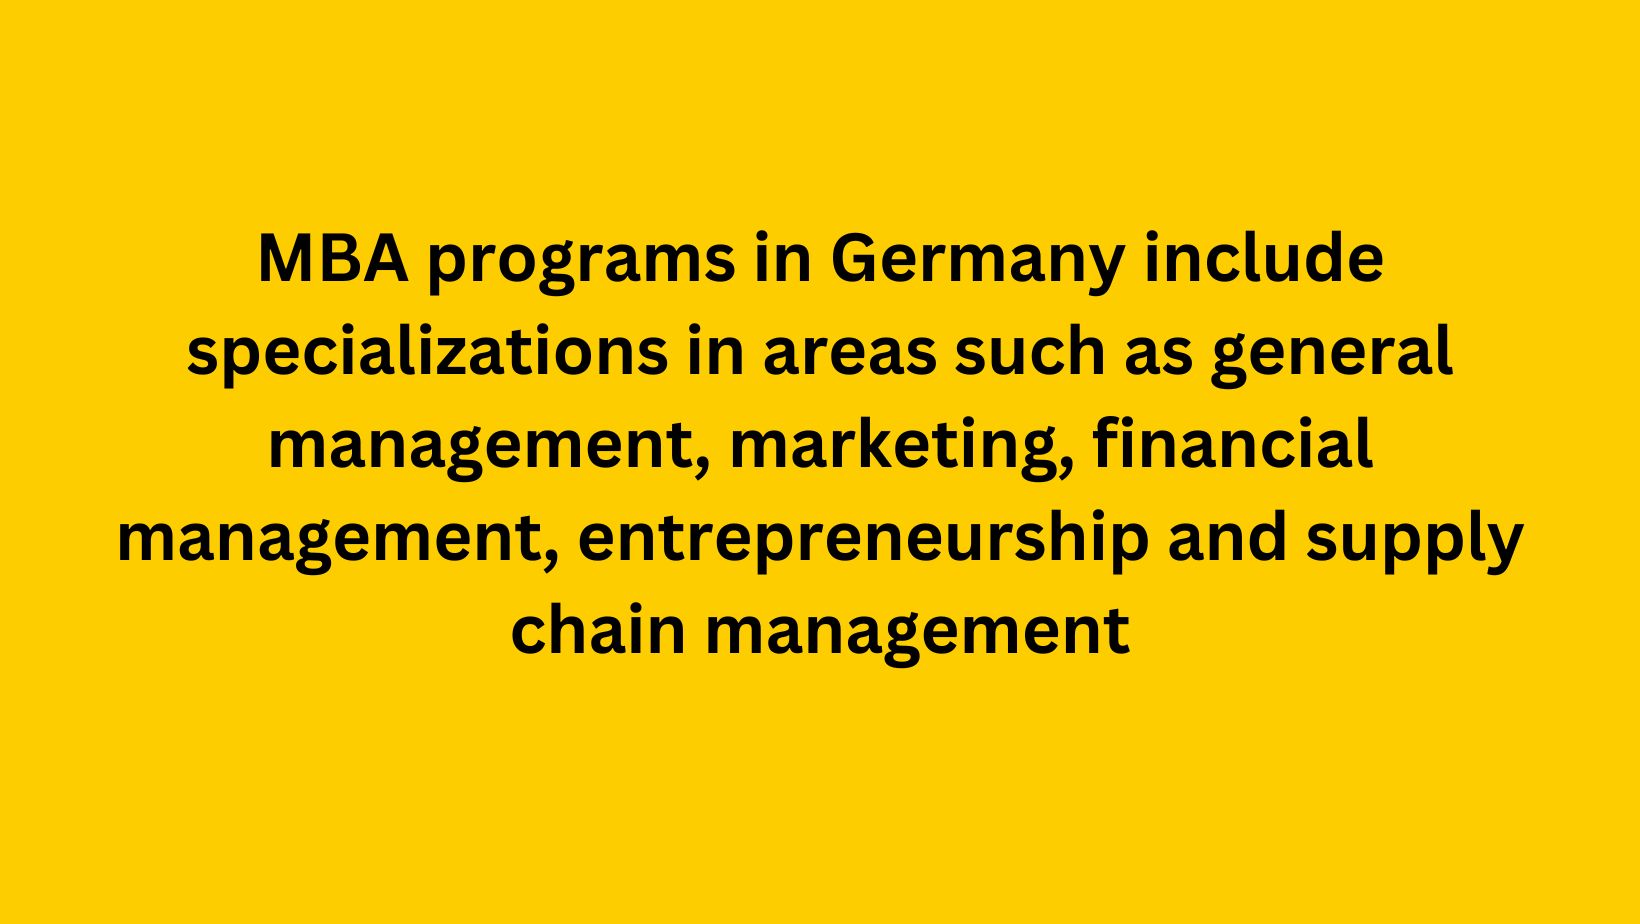 MBA From Germany - KCR CONSULTANTS - MBA courses in Germany